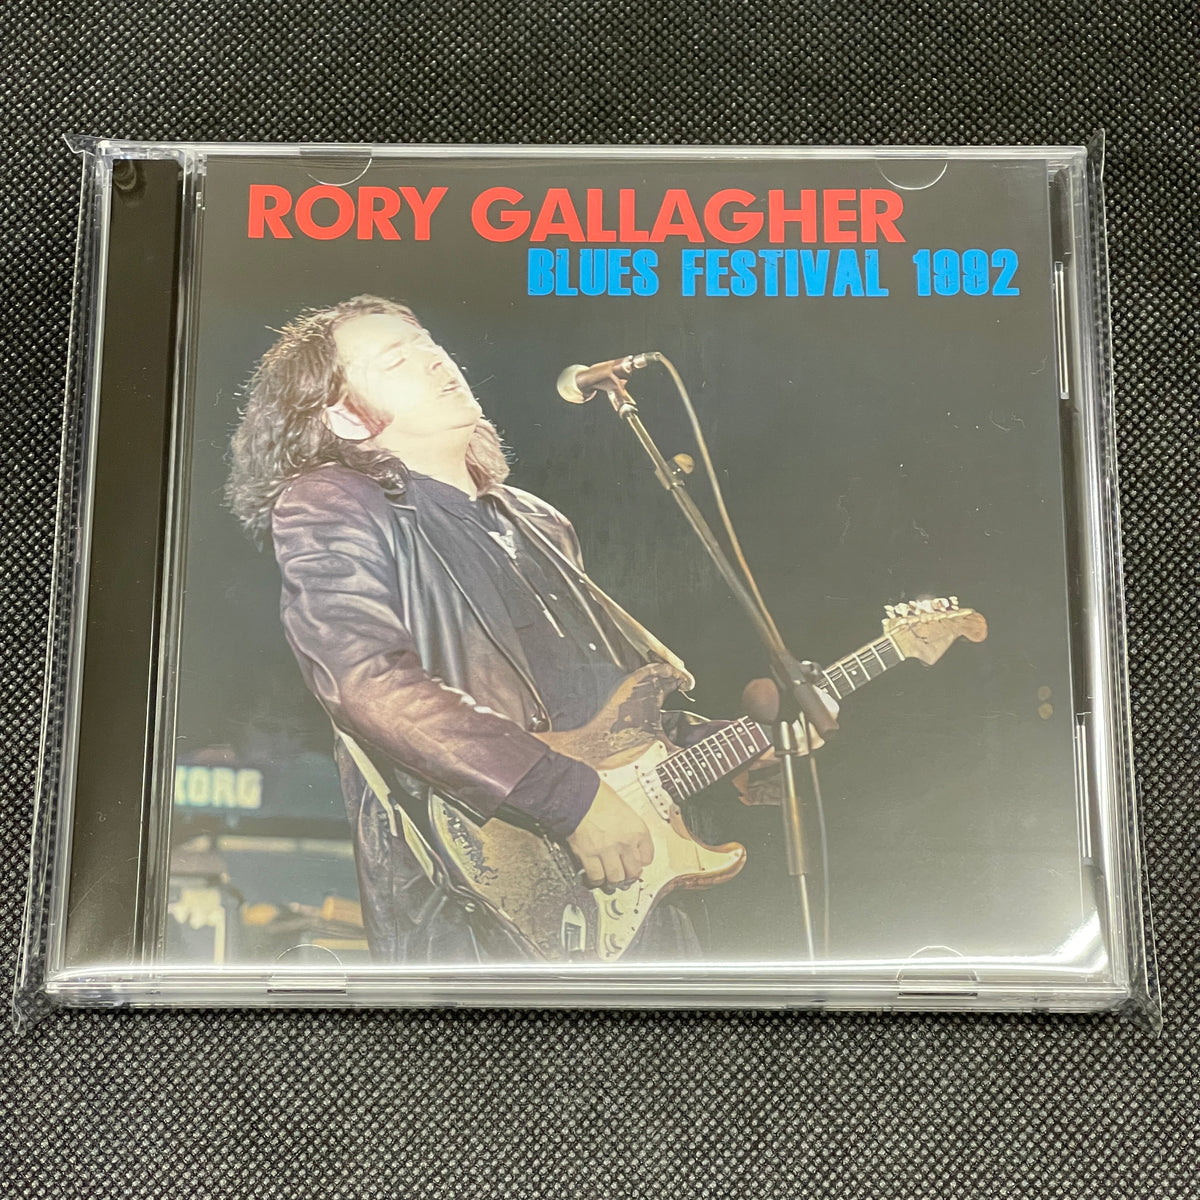 RORY GALLAGHER - BLUES FESTIVAL 1992 (2CDR) – Acme Hot Disc